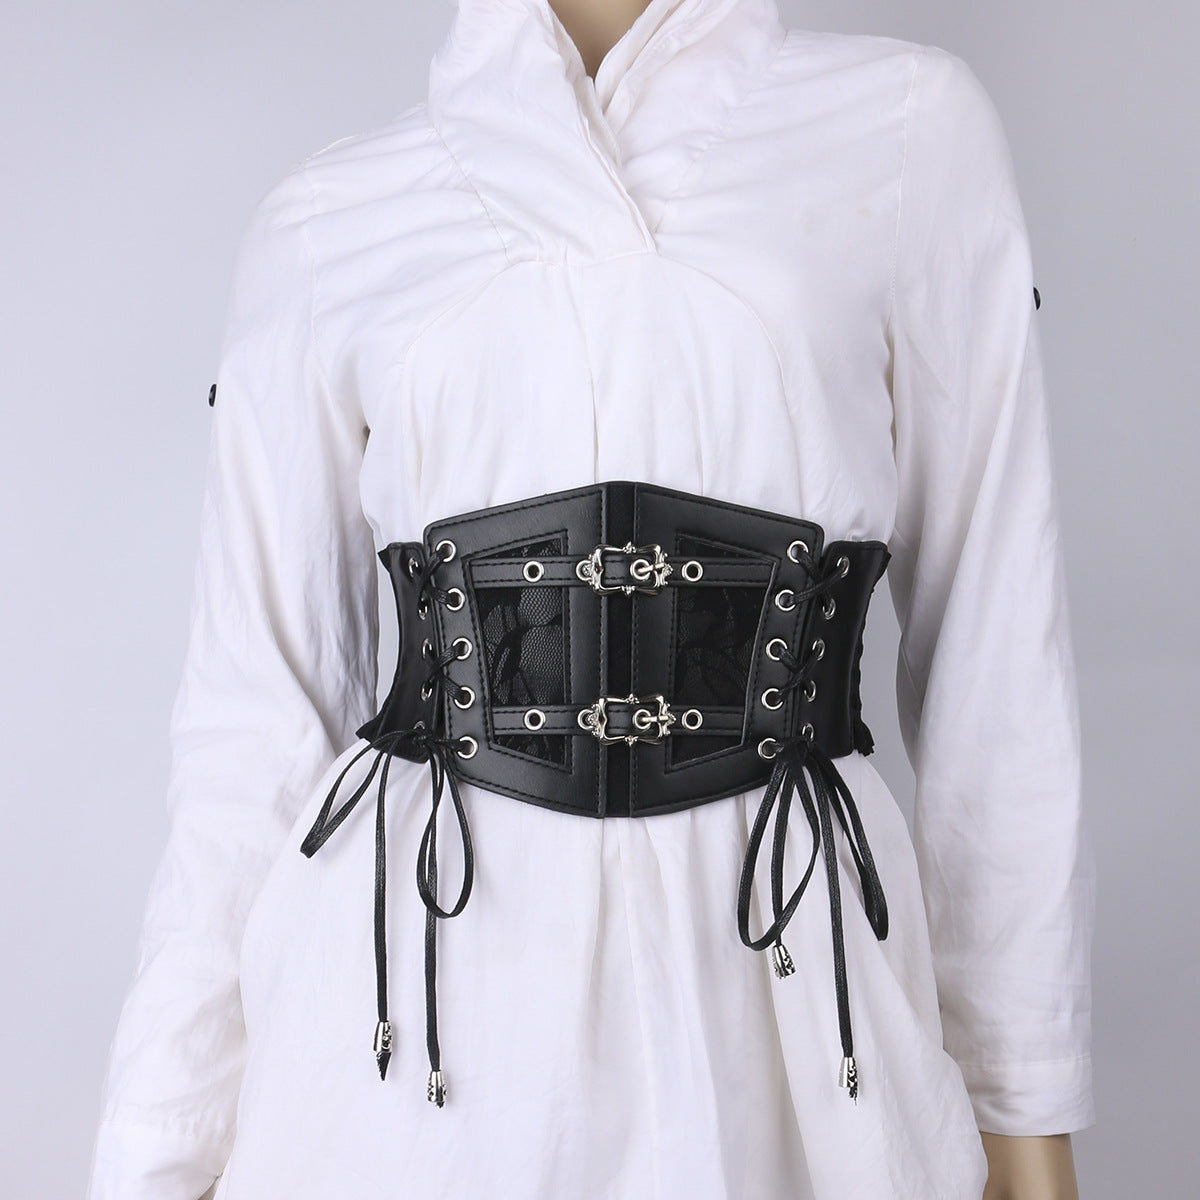 DIY Waist band with leftover Lace, Lace belt for traditional outfits